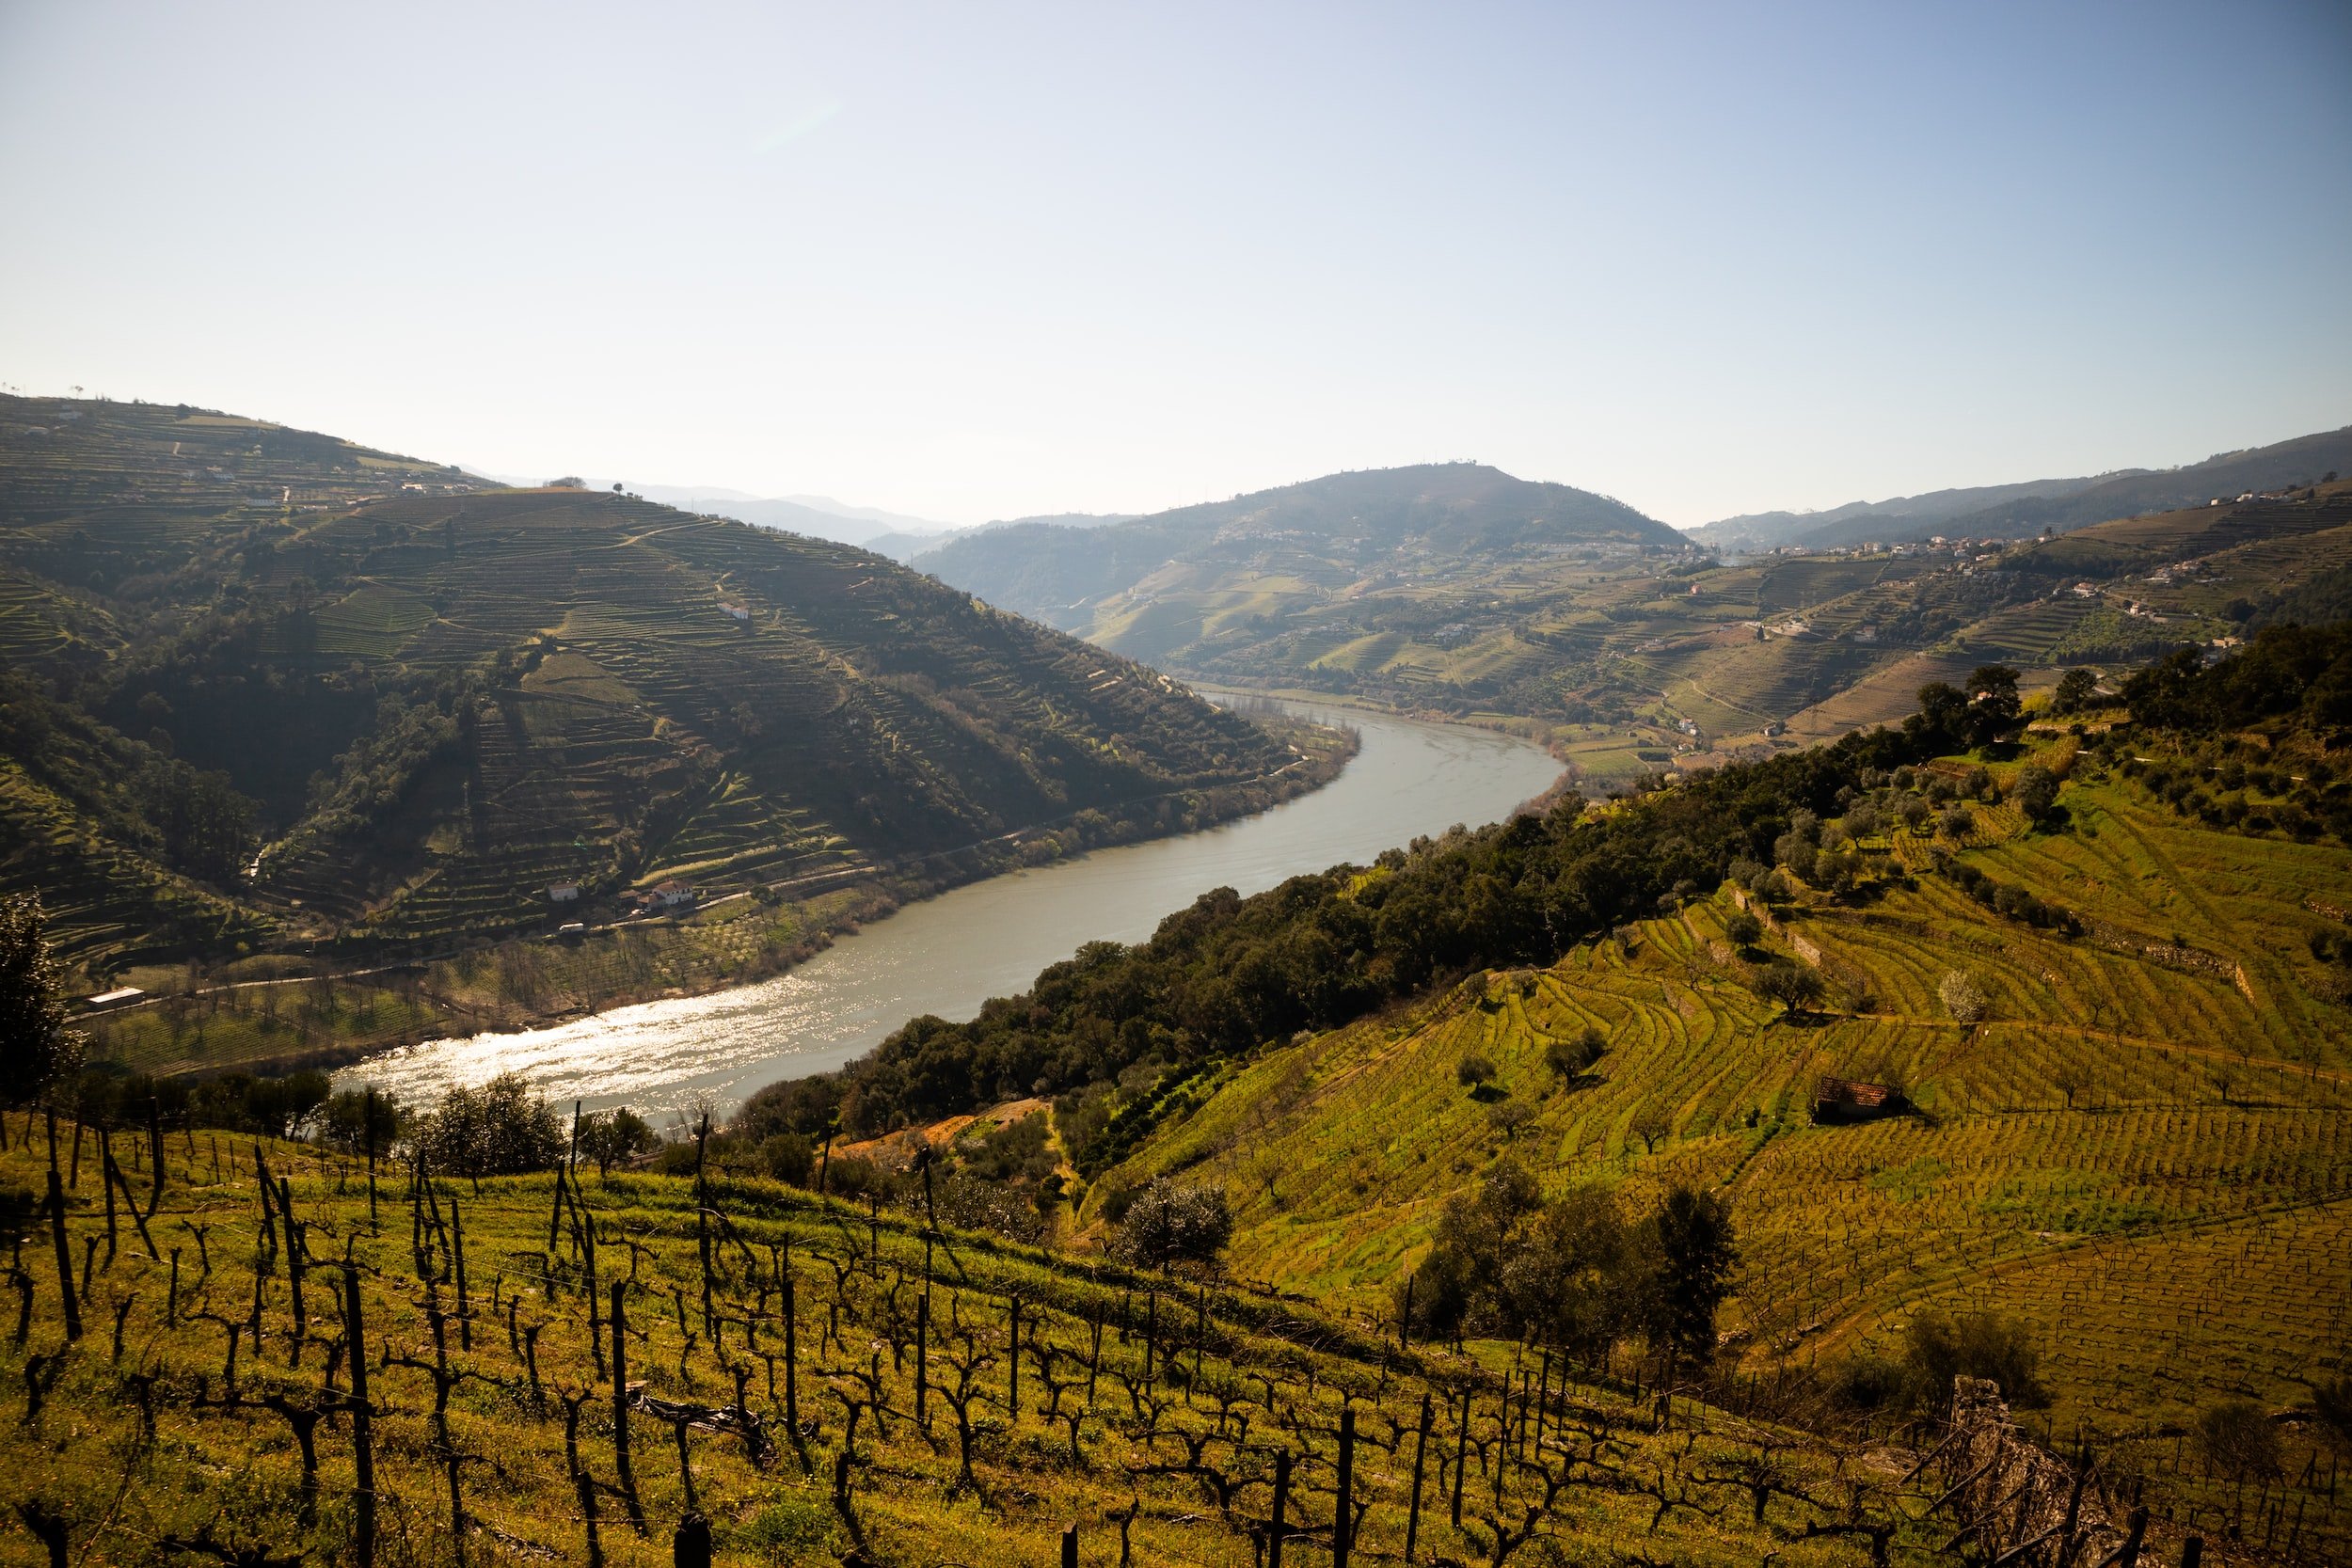 Discover the Douro valley and river in Portugal